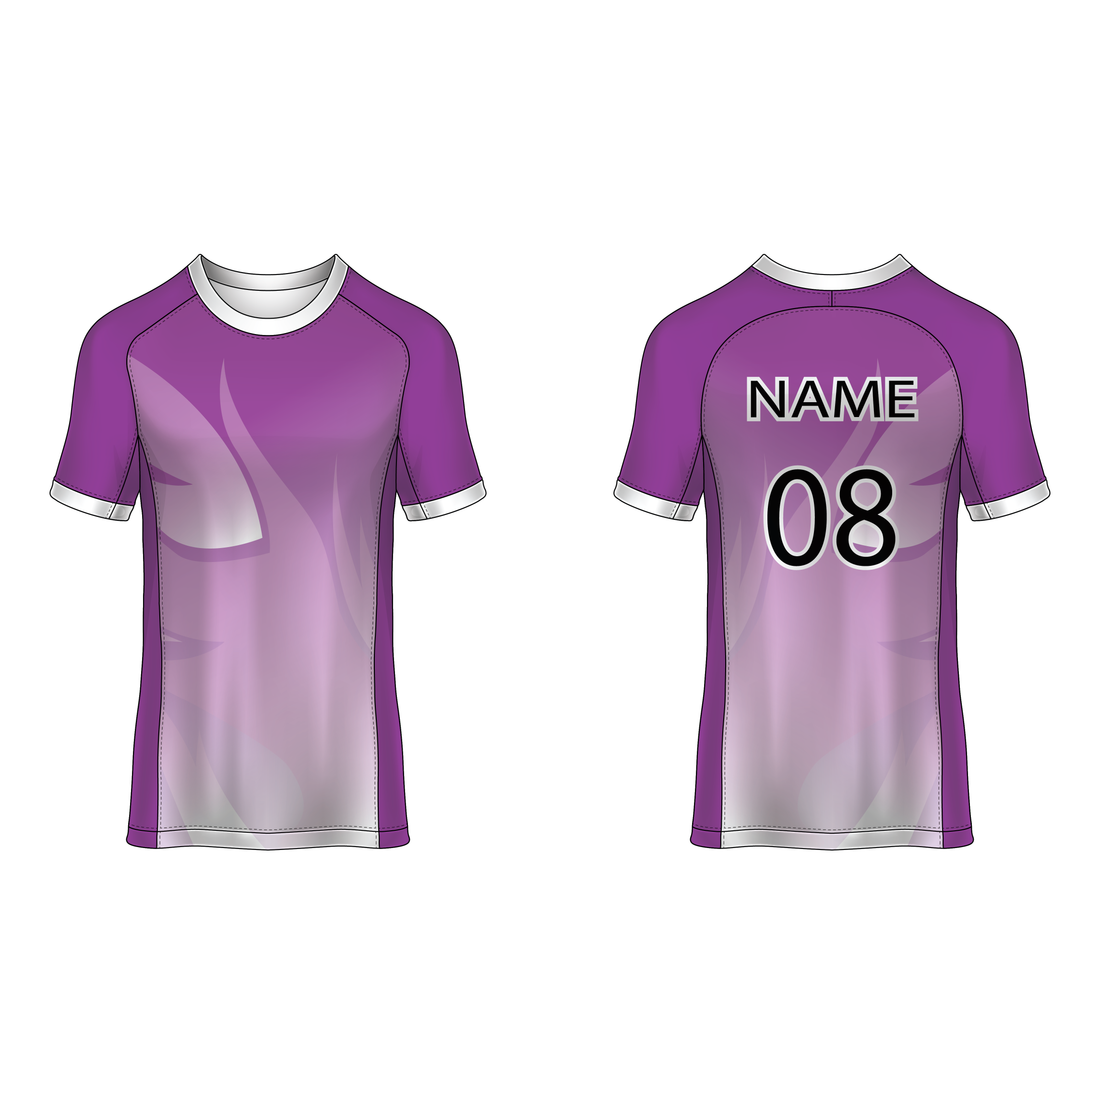 NEXT PRINT All Over Printed Customized Sublimation T-Shirt Unisex Sports Jersey Player Name & Number, Team Name NP50000256